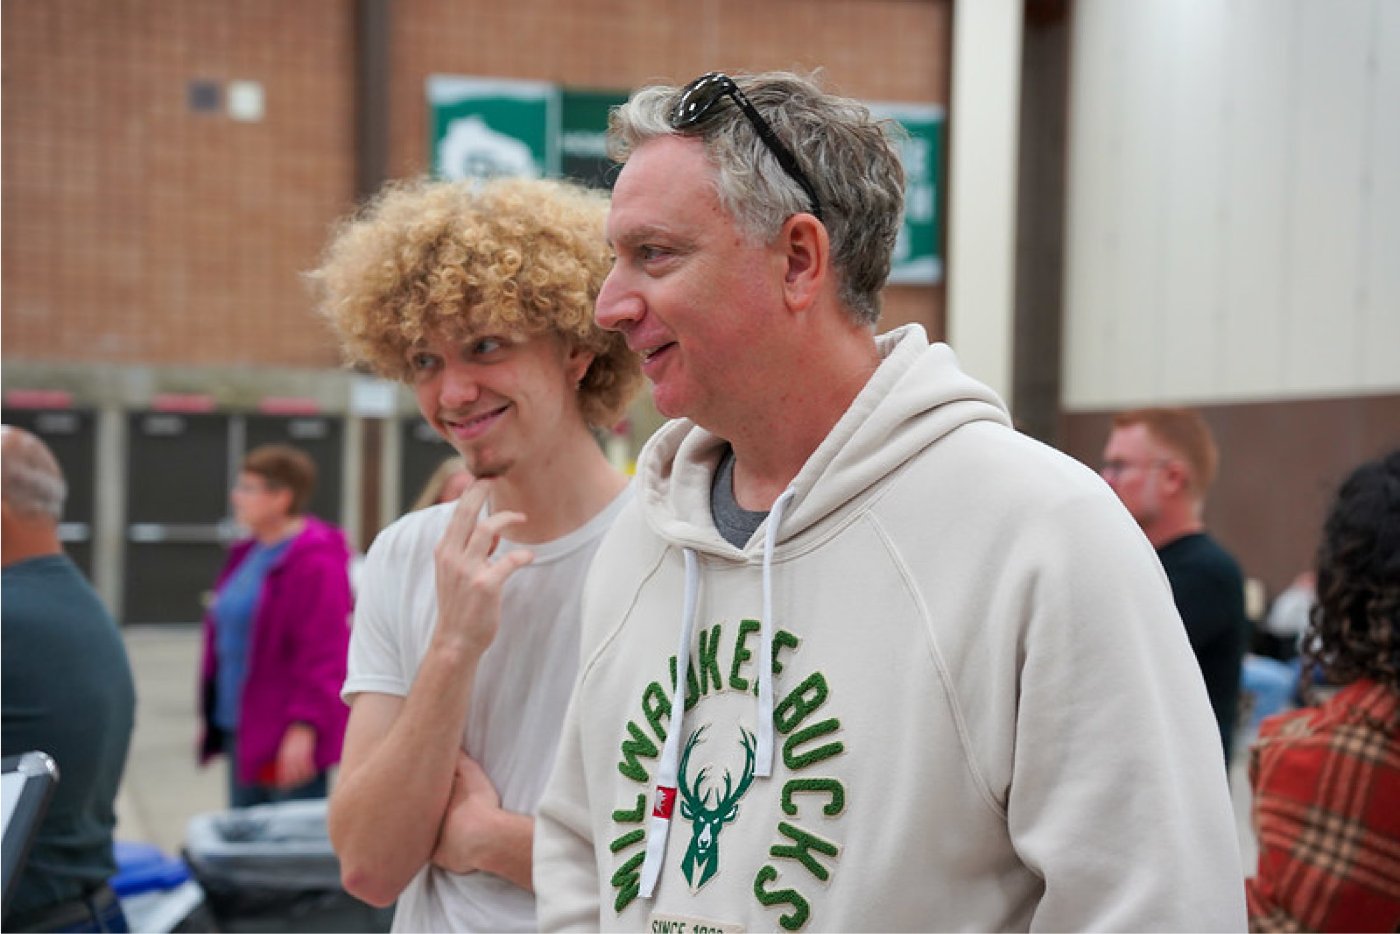 A student and their parent attend an event at the Kress Events Center